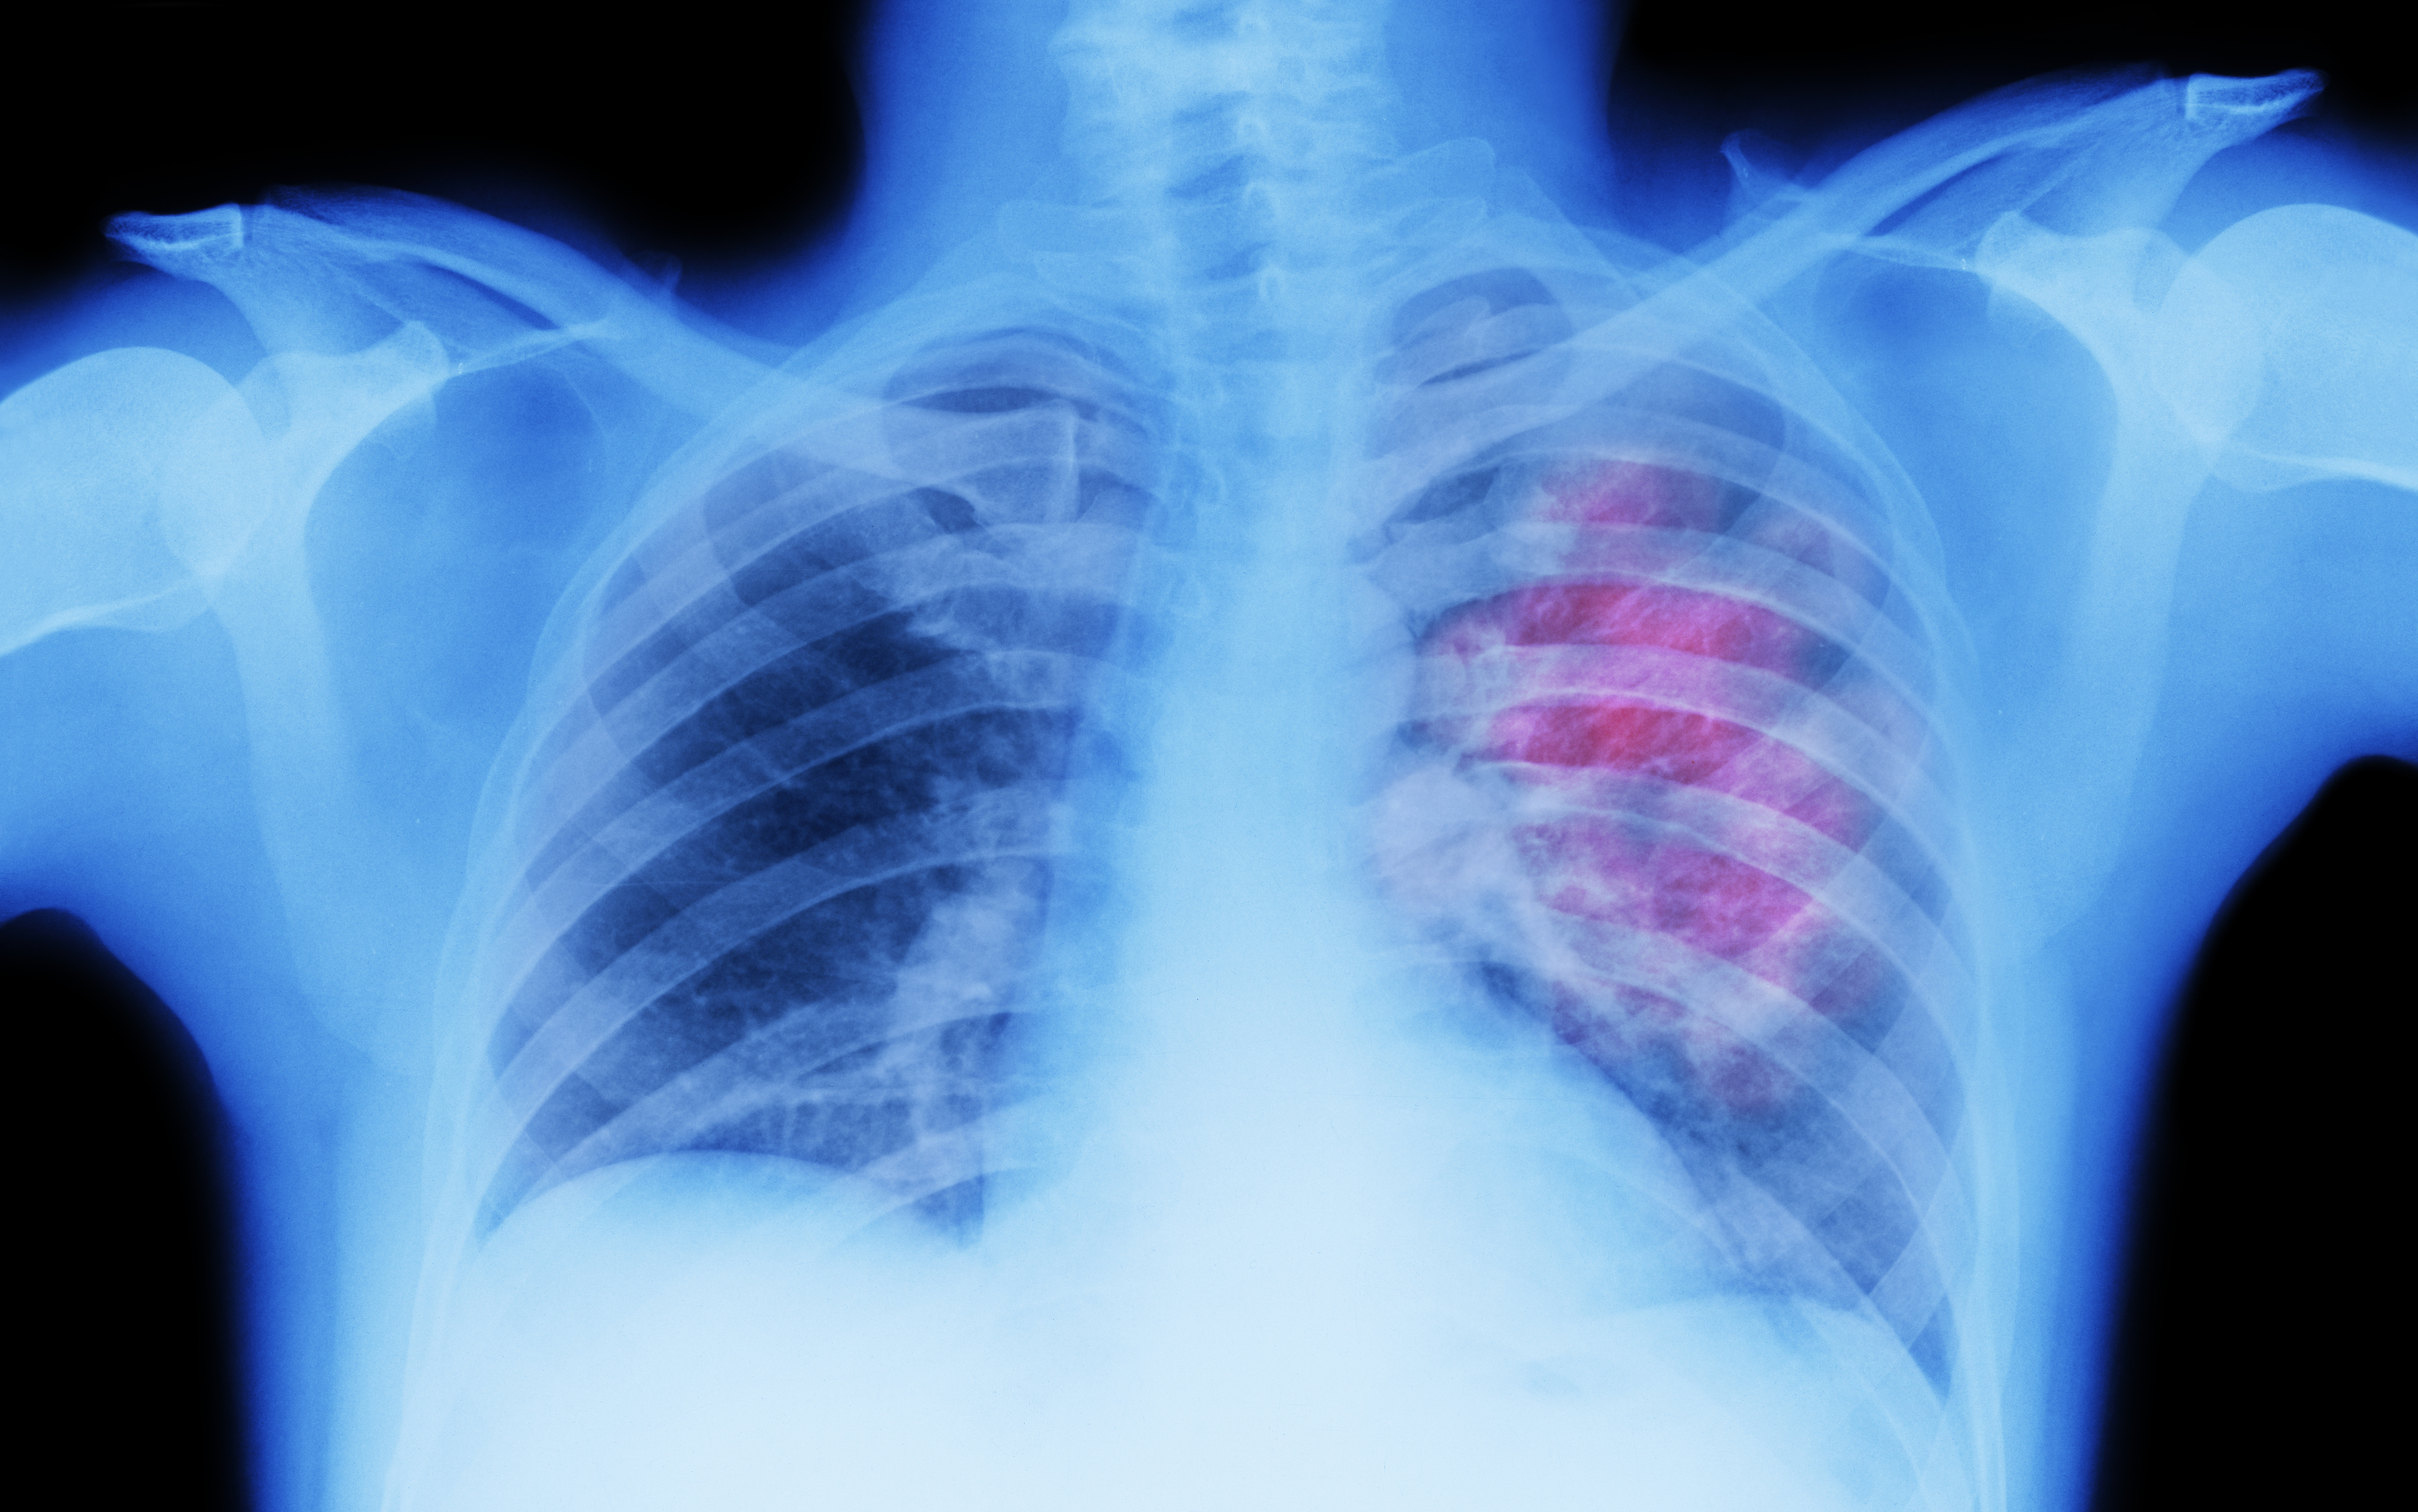 An X-ray with a red area indicating cancer